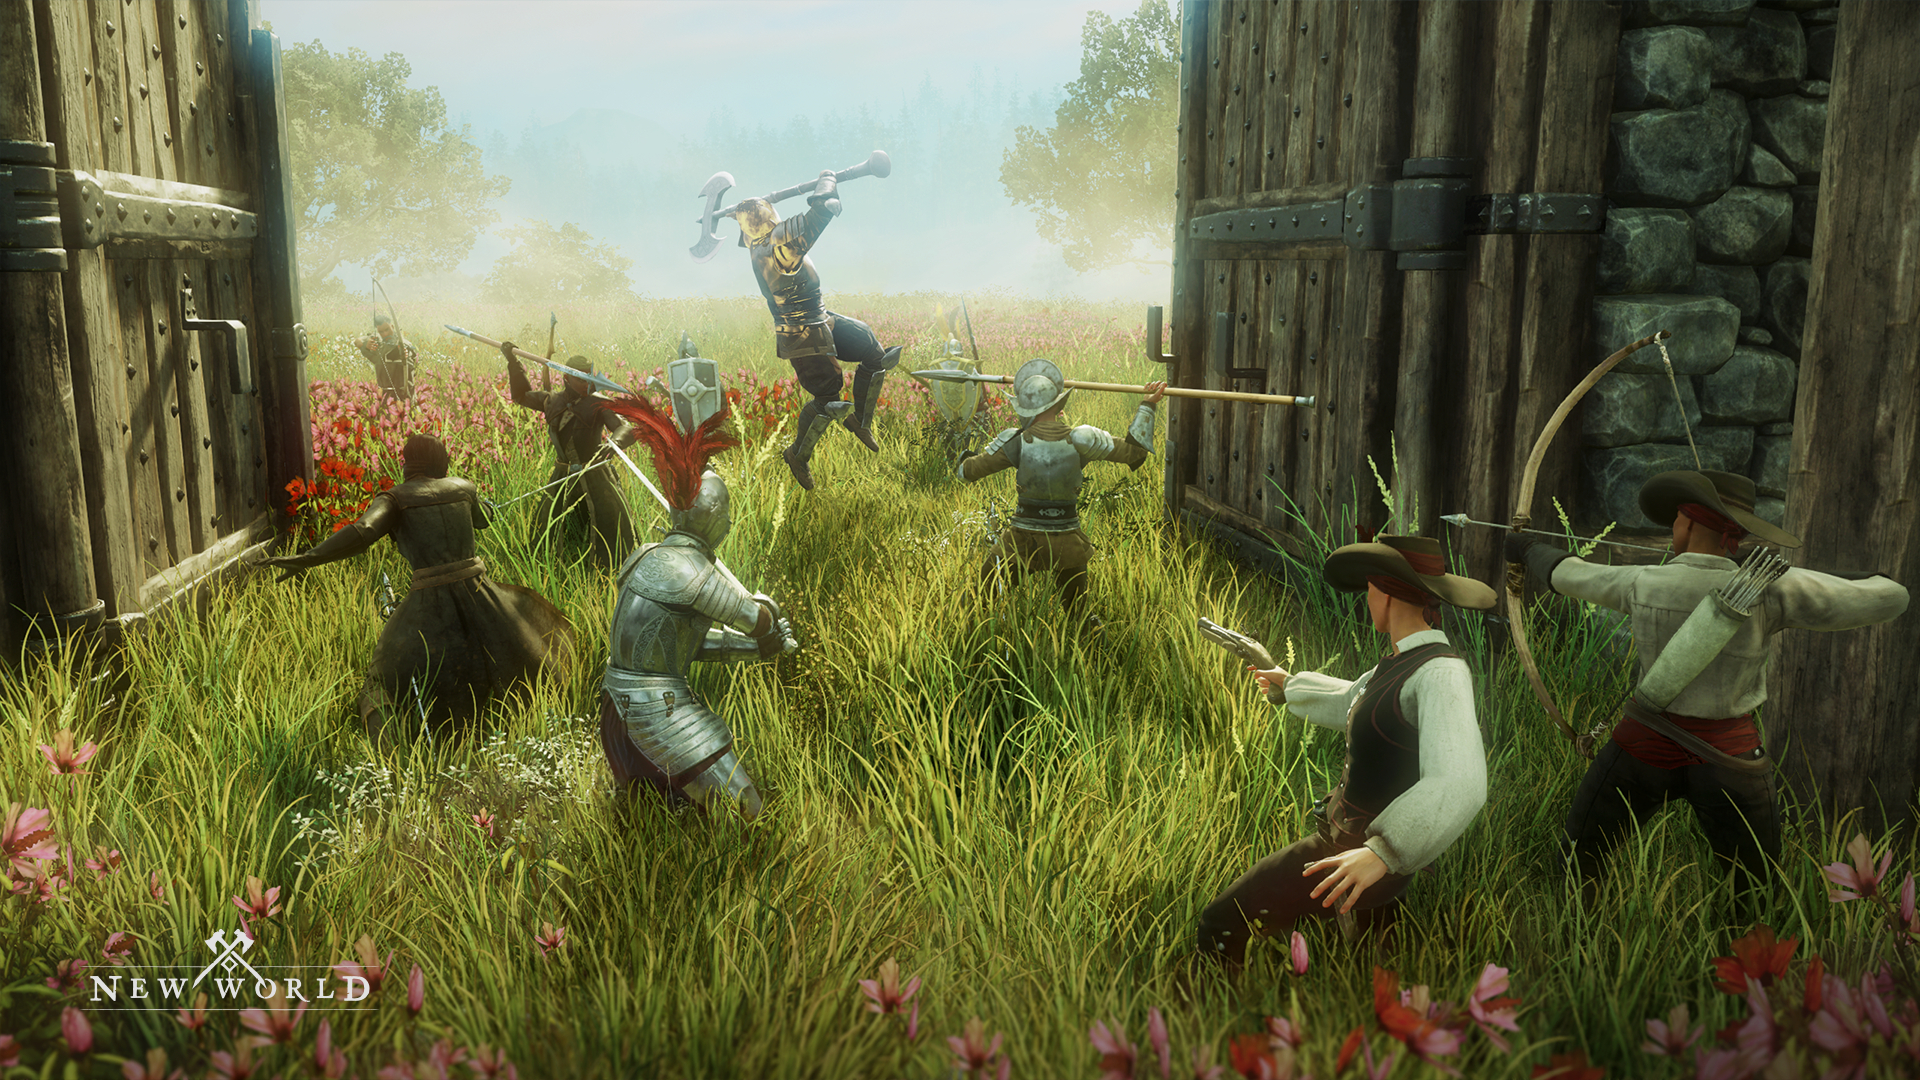 s 'New World' MMO Game Coming to PC in May 2020